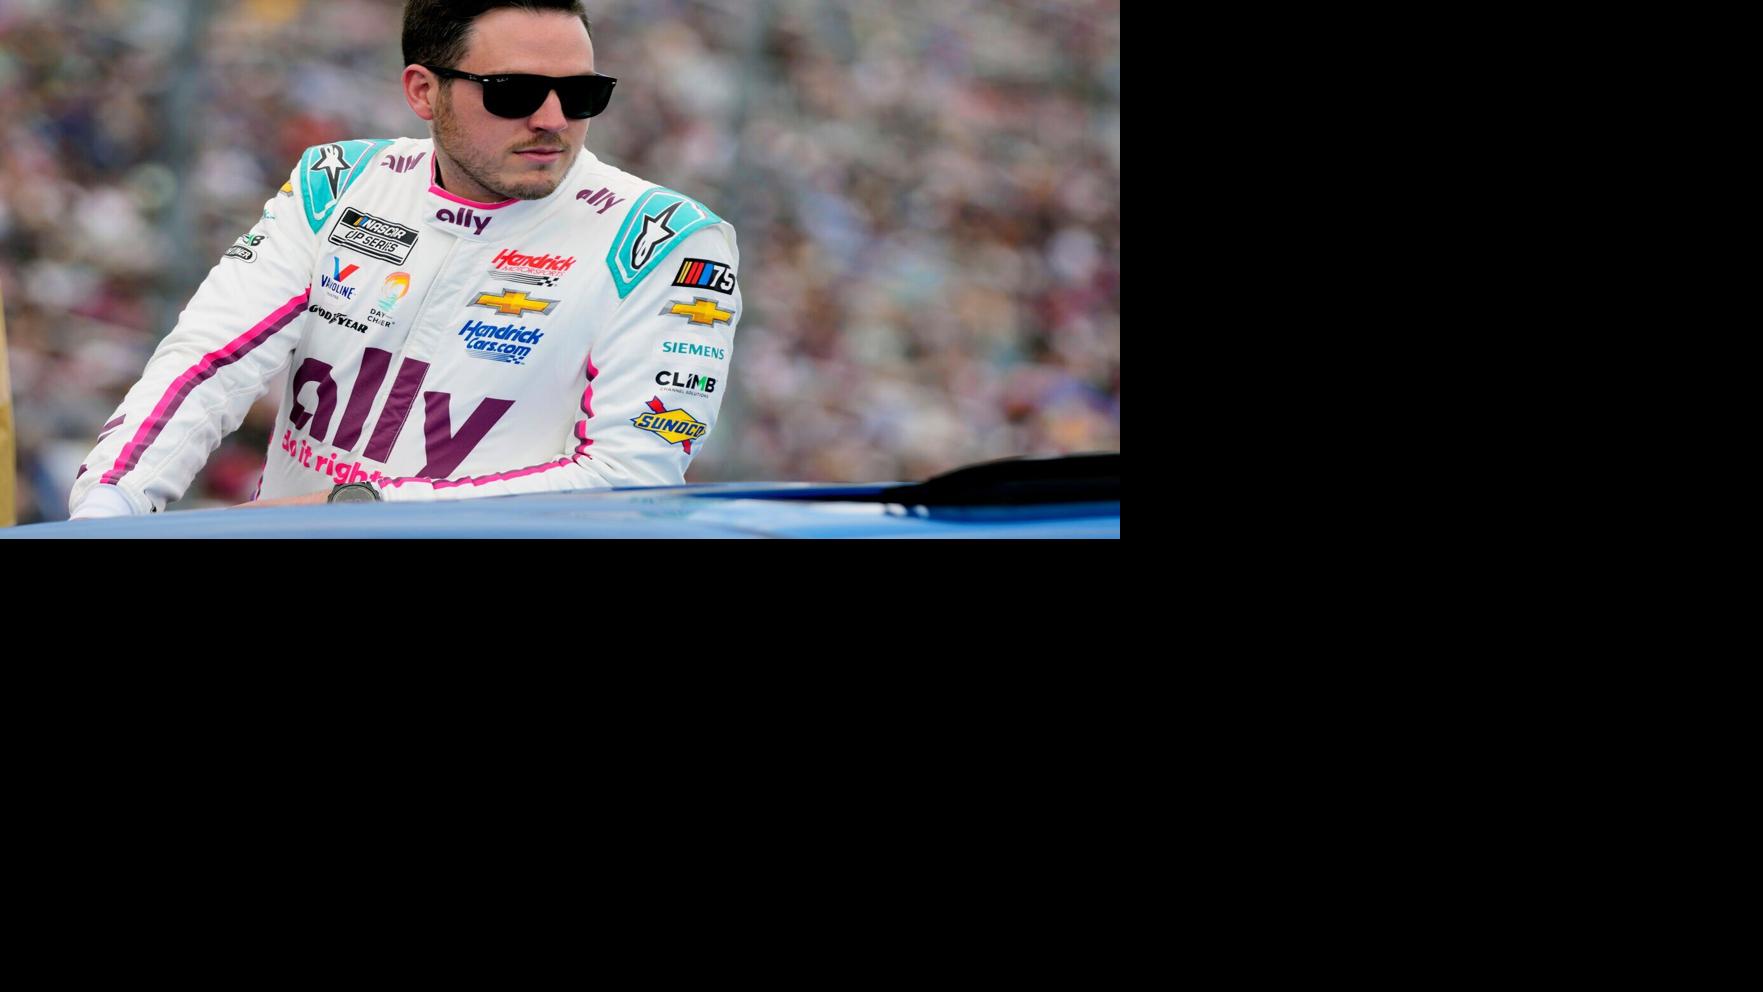 Bowman cleared to return to NASCAR competition at Charlotte